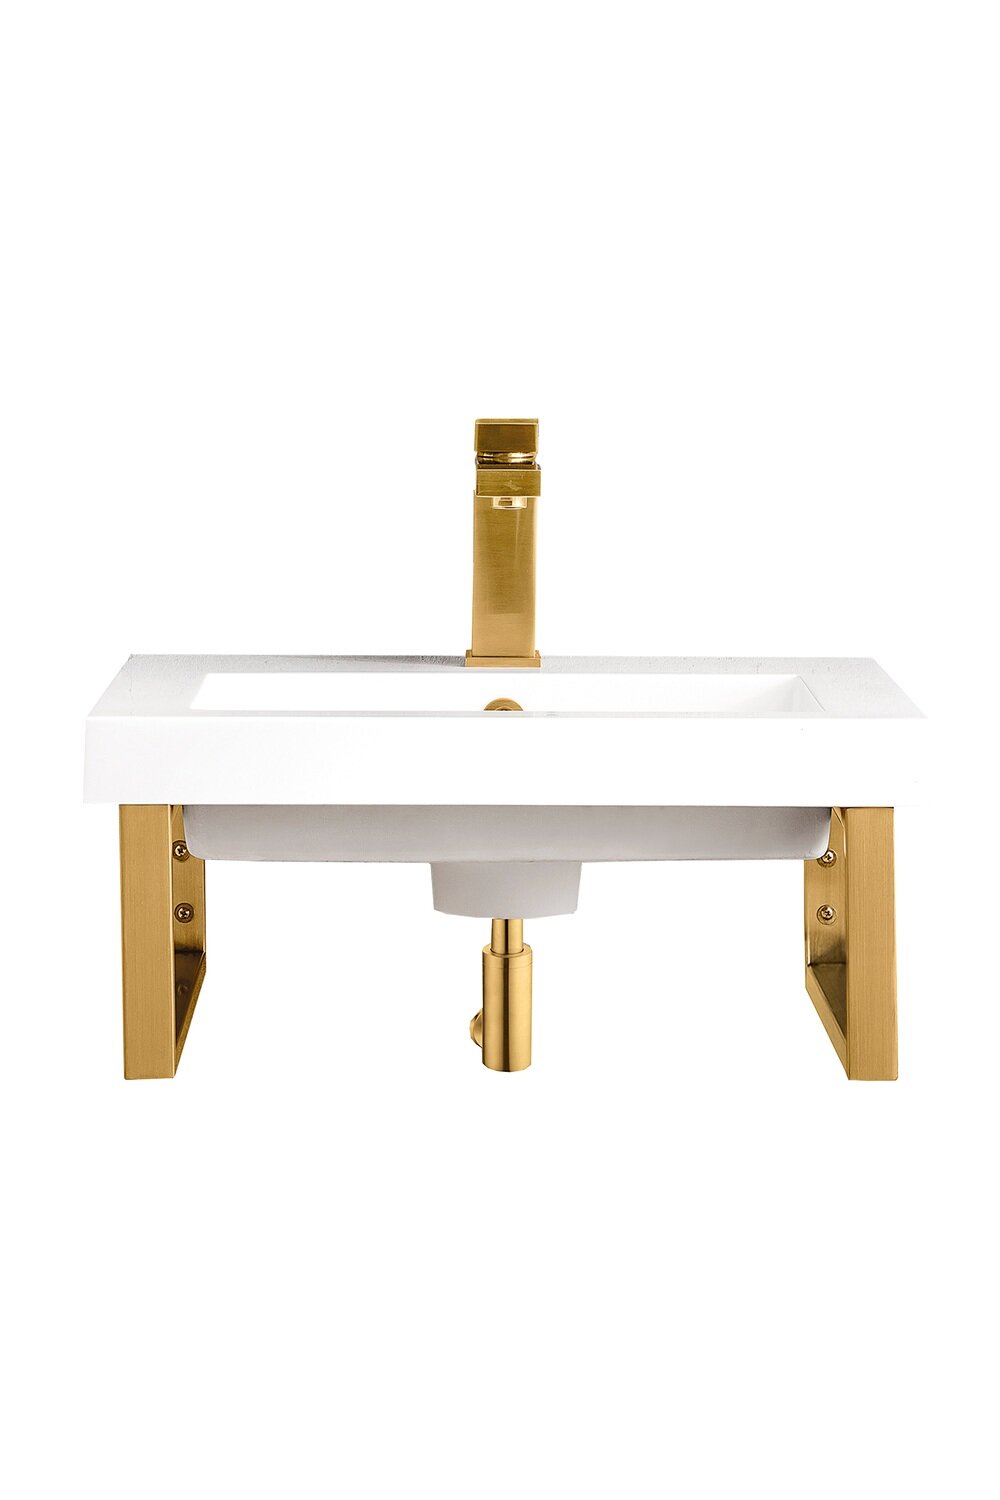 JAMES MARTIN - Two Boston 15.25&quot; Wall Brackets, Radiant Gold w/ 20&quot; White Glossy Composite Stone Top 055BK16RGD20WG2